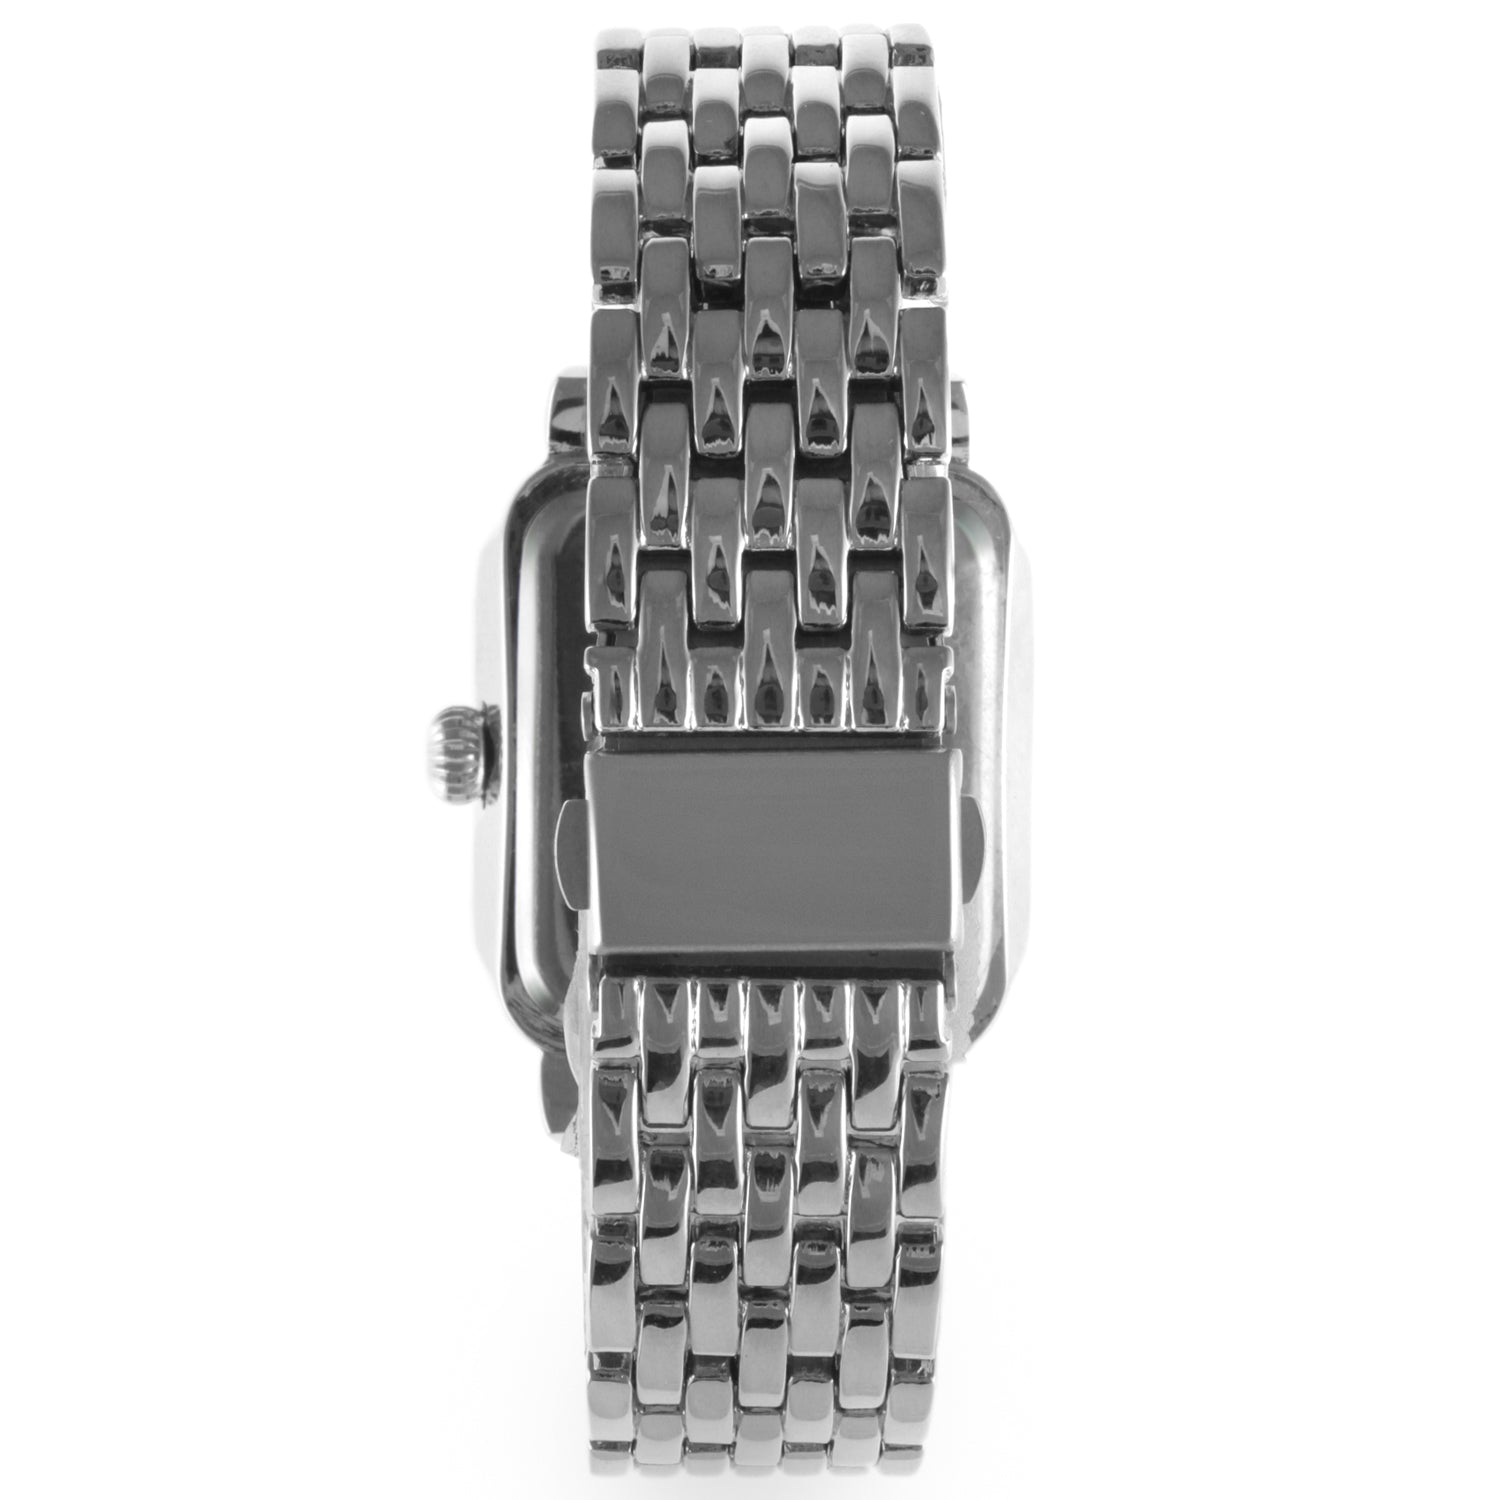 Custom replacement Stainless Steel metal watch strap for Cartier Tank Solo